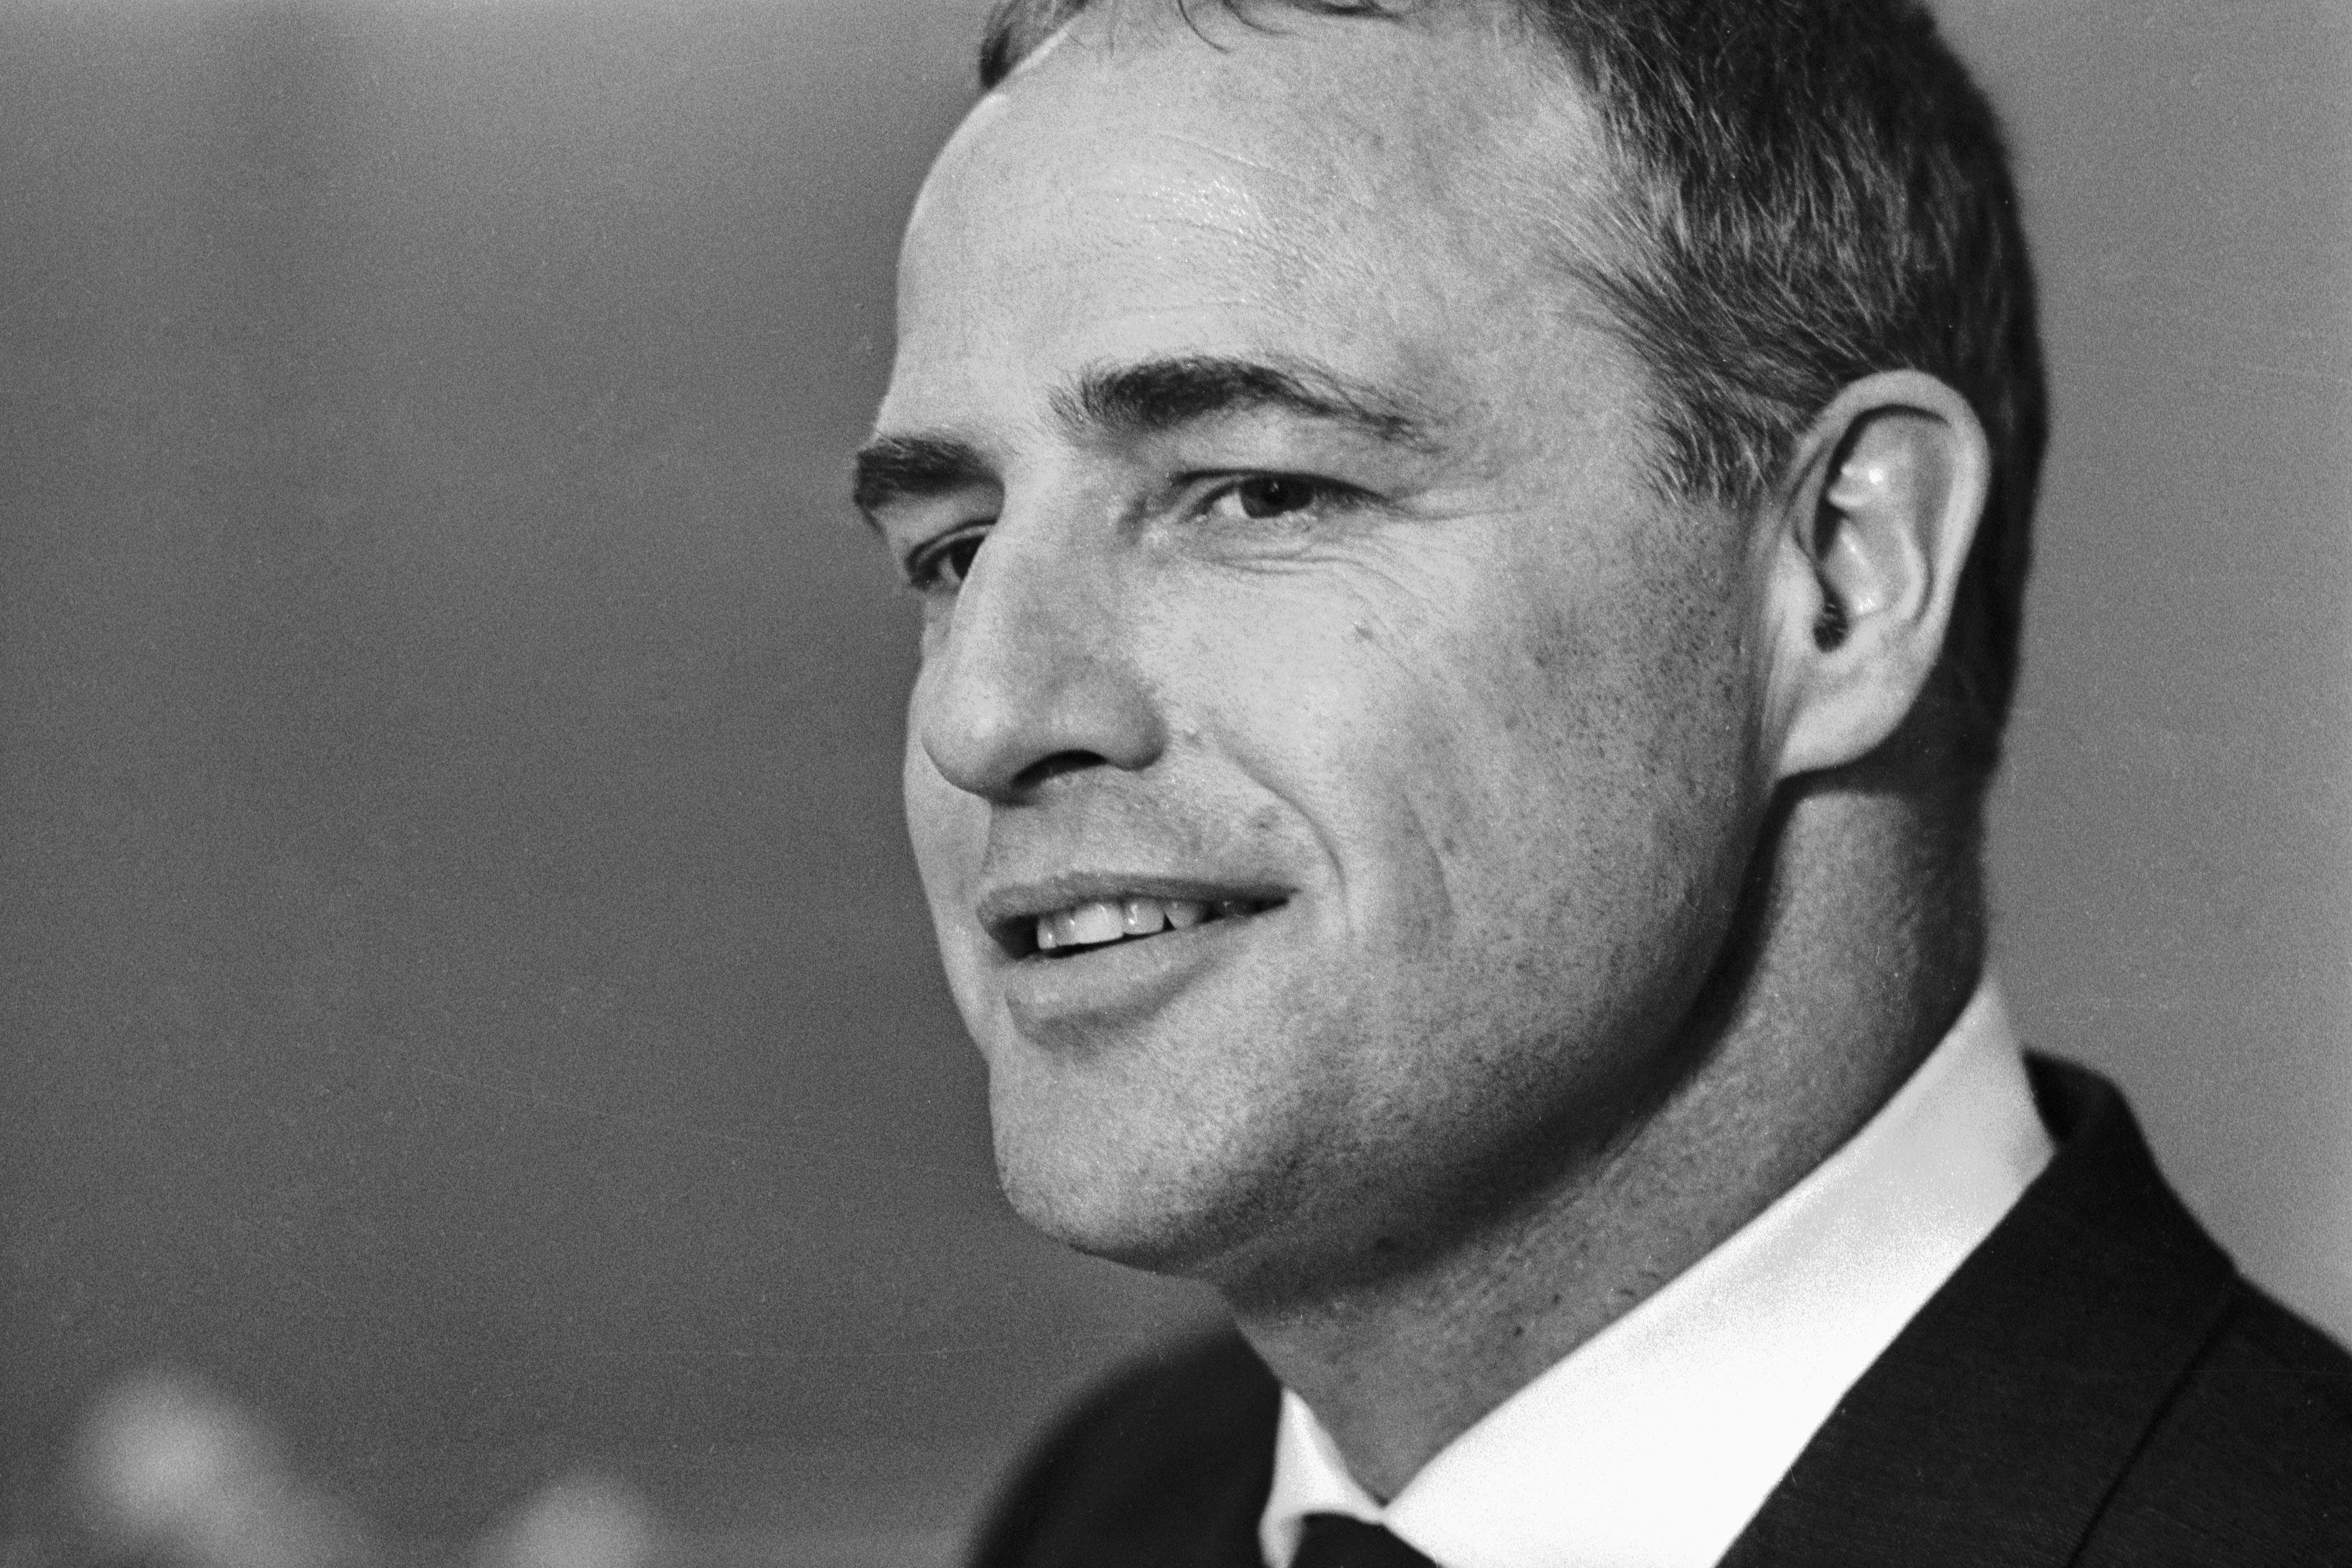 Marlon Brando smiling, wearing a suit in a black and white photo.